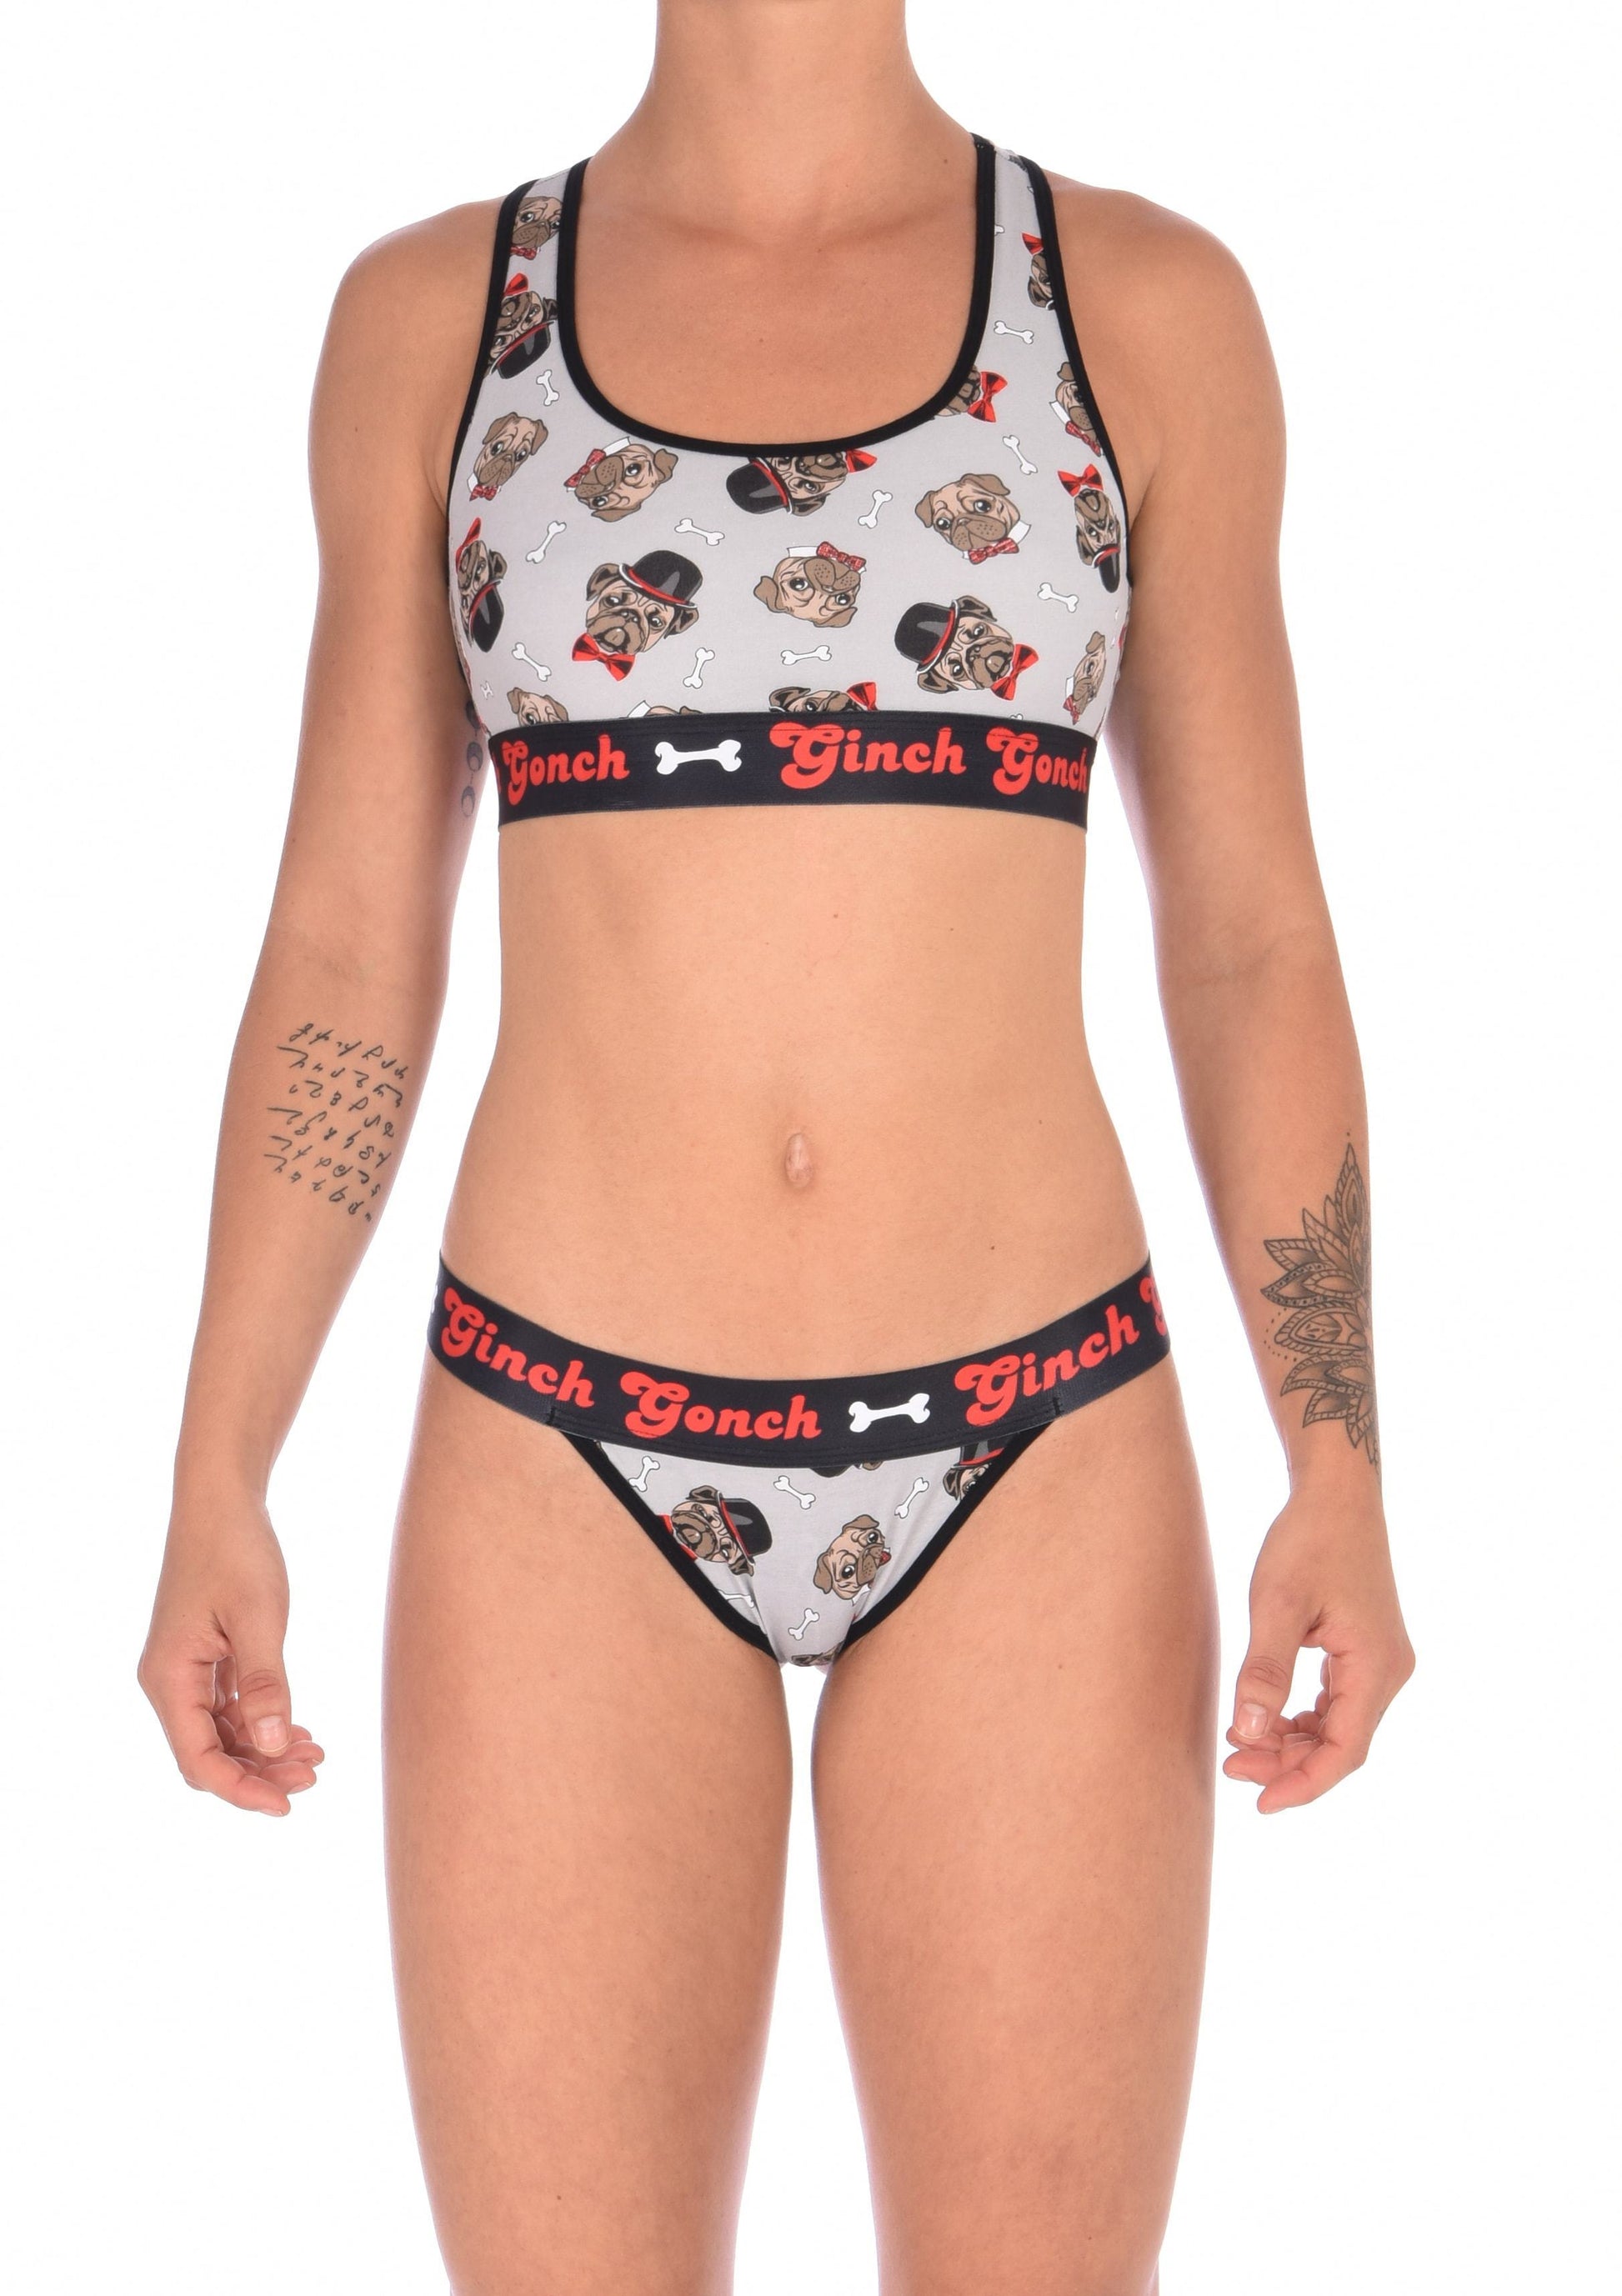 GG Ginch Gonch Pug Life thong - women's Underwear grey background with pugs with top hats and bow ties and bones. Black trim with black printed waistband front. Shown with matching sports bra